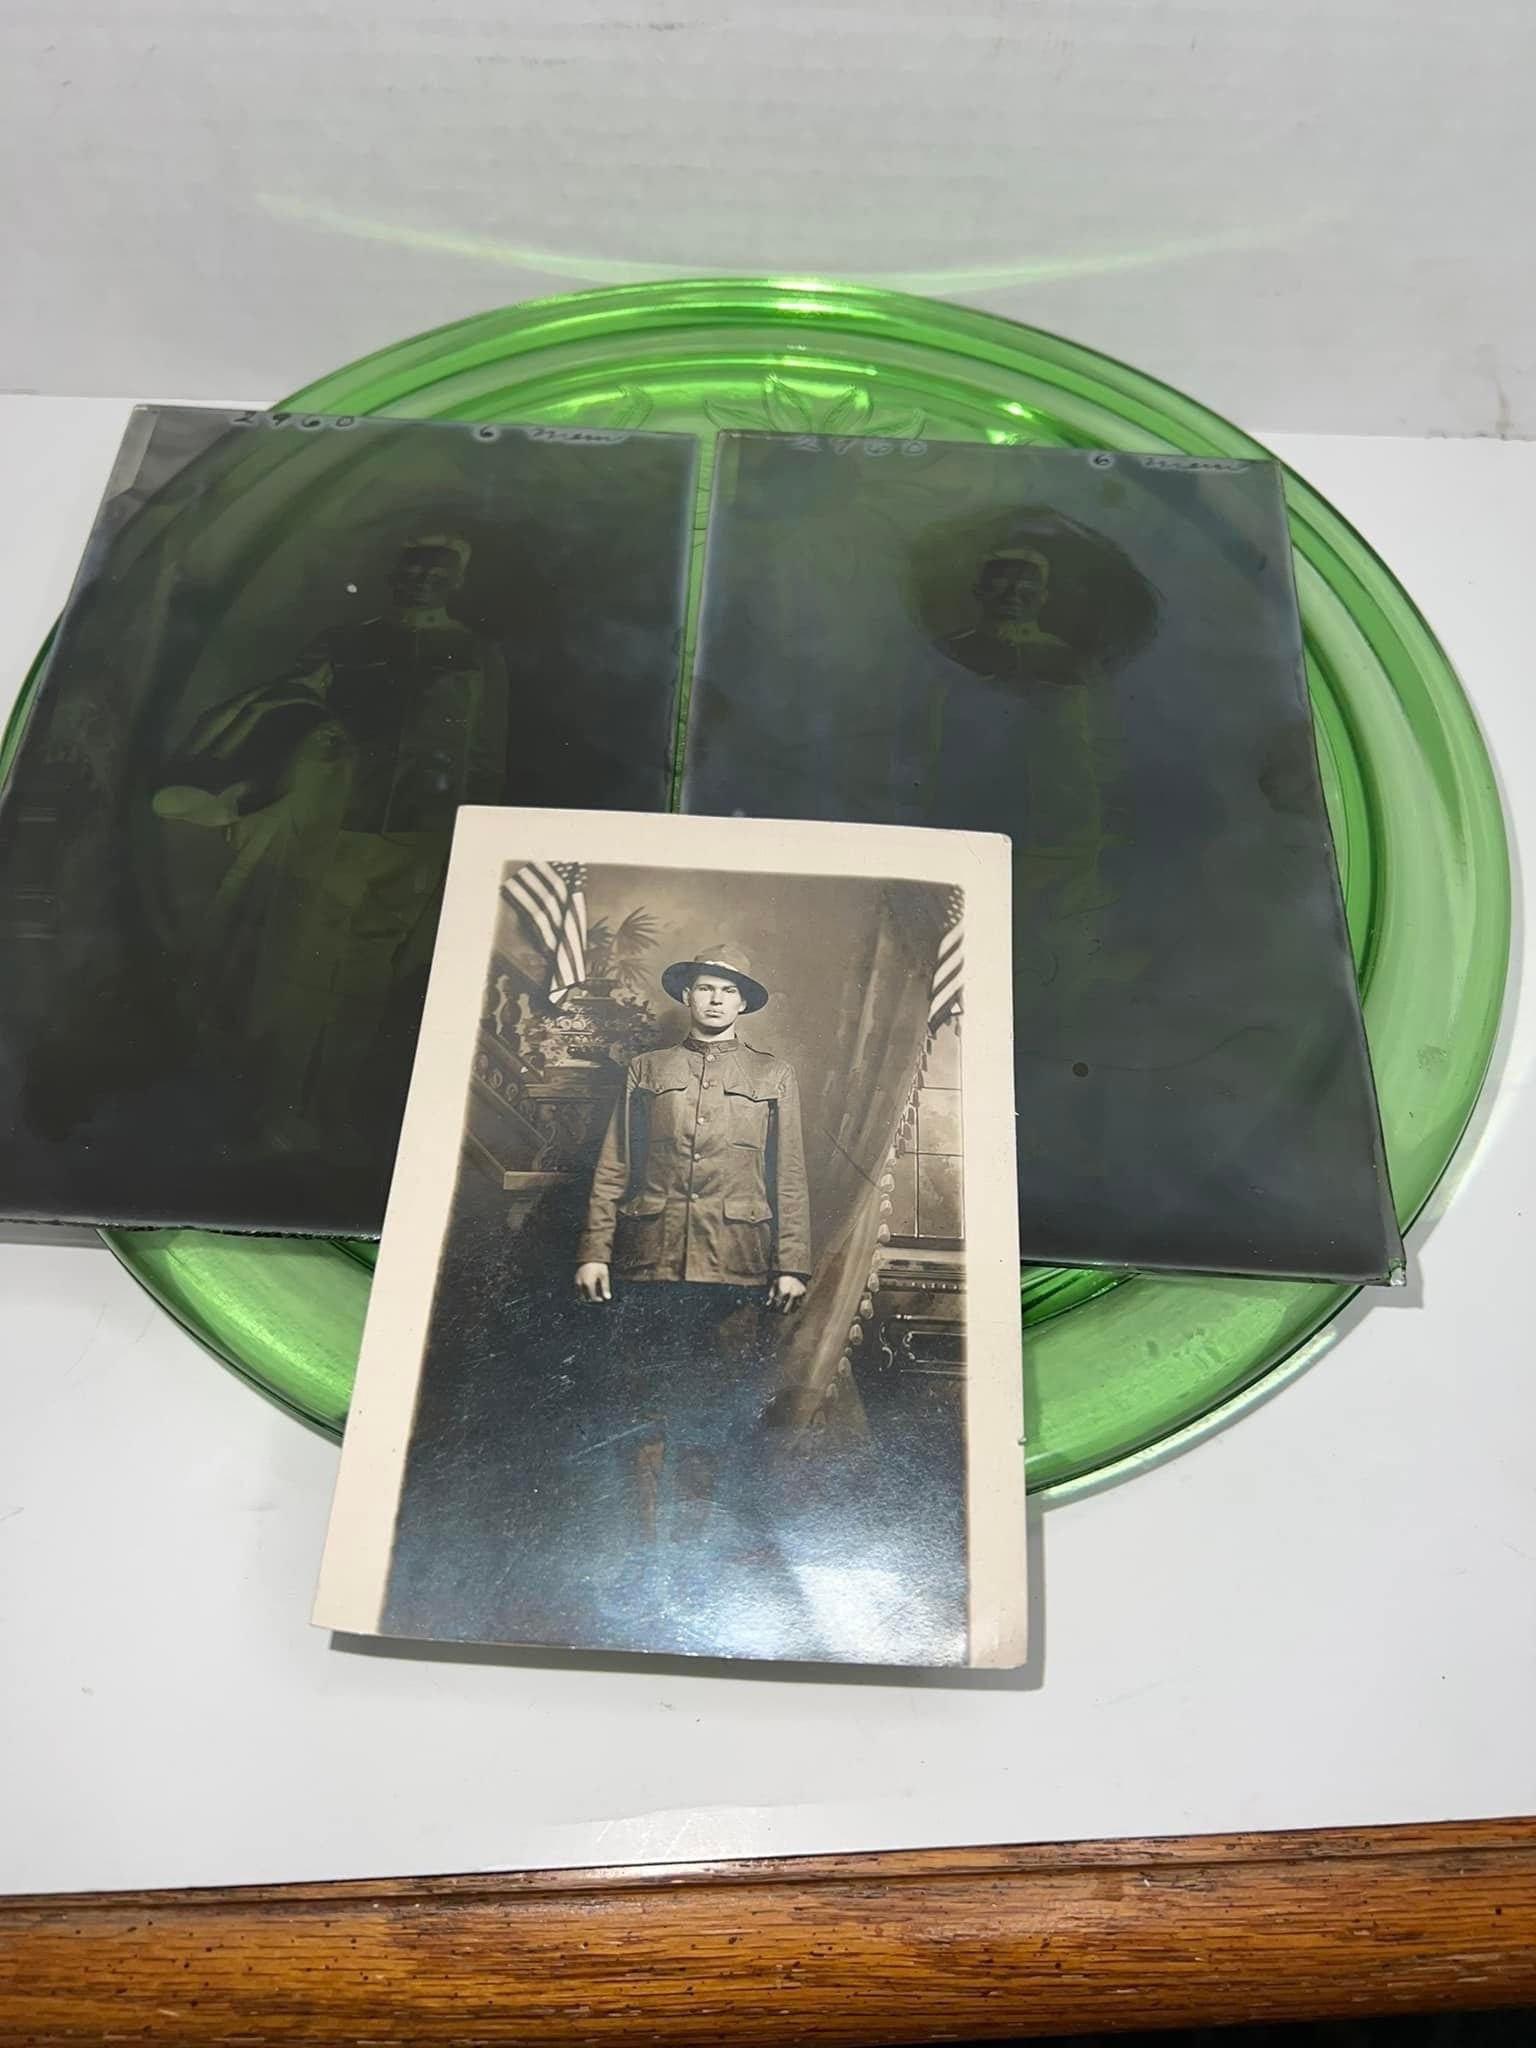 Antique Ww1 soldier glass negatives & 1 trimmed rppc vintage photography